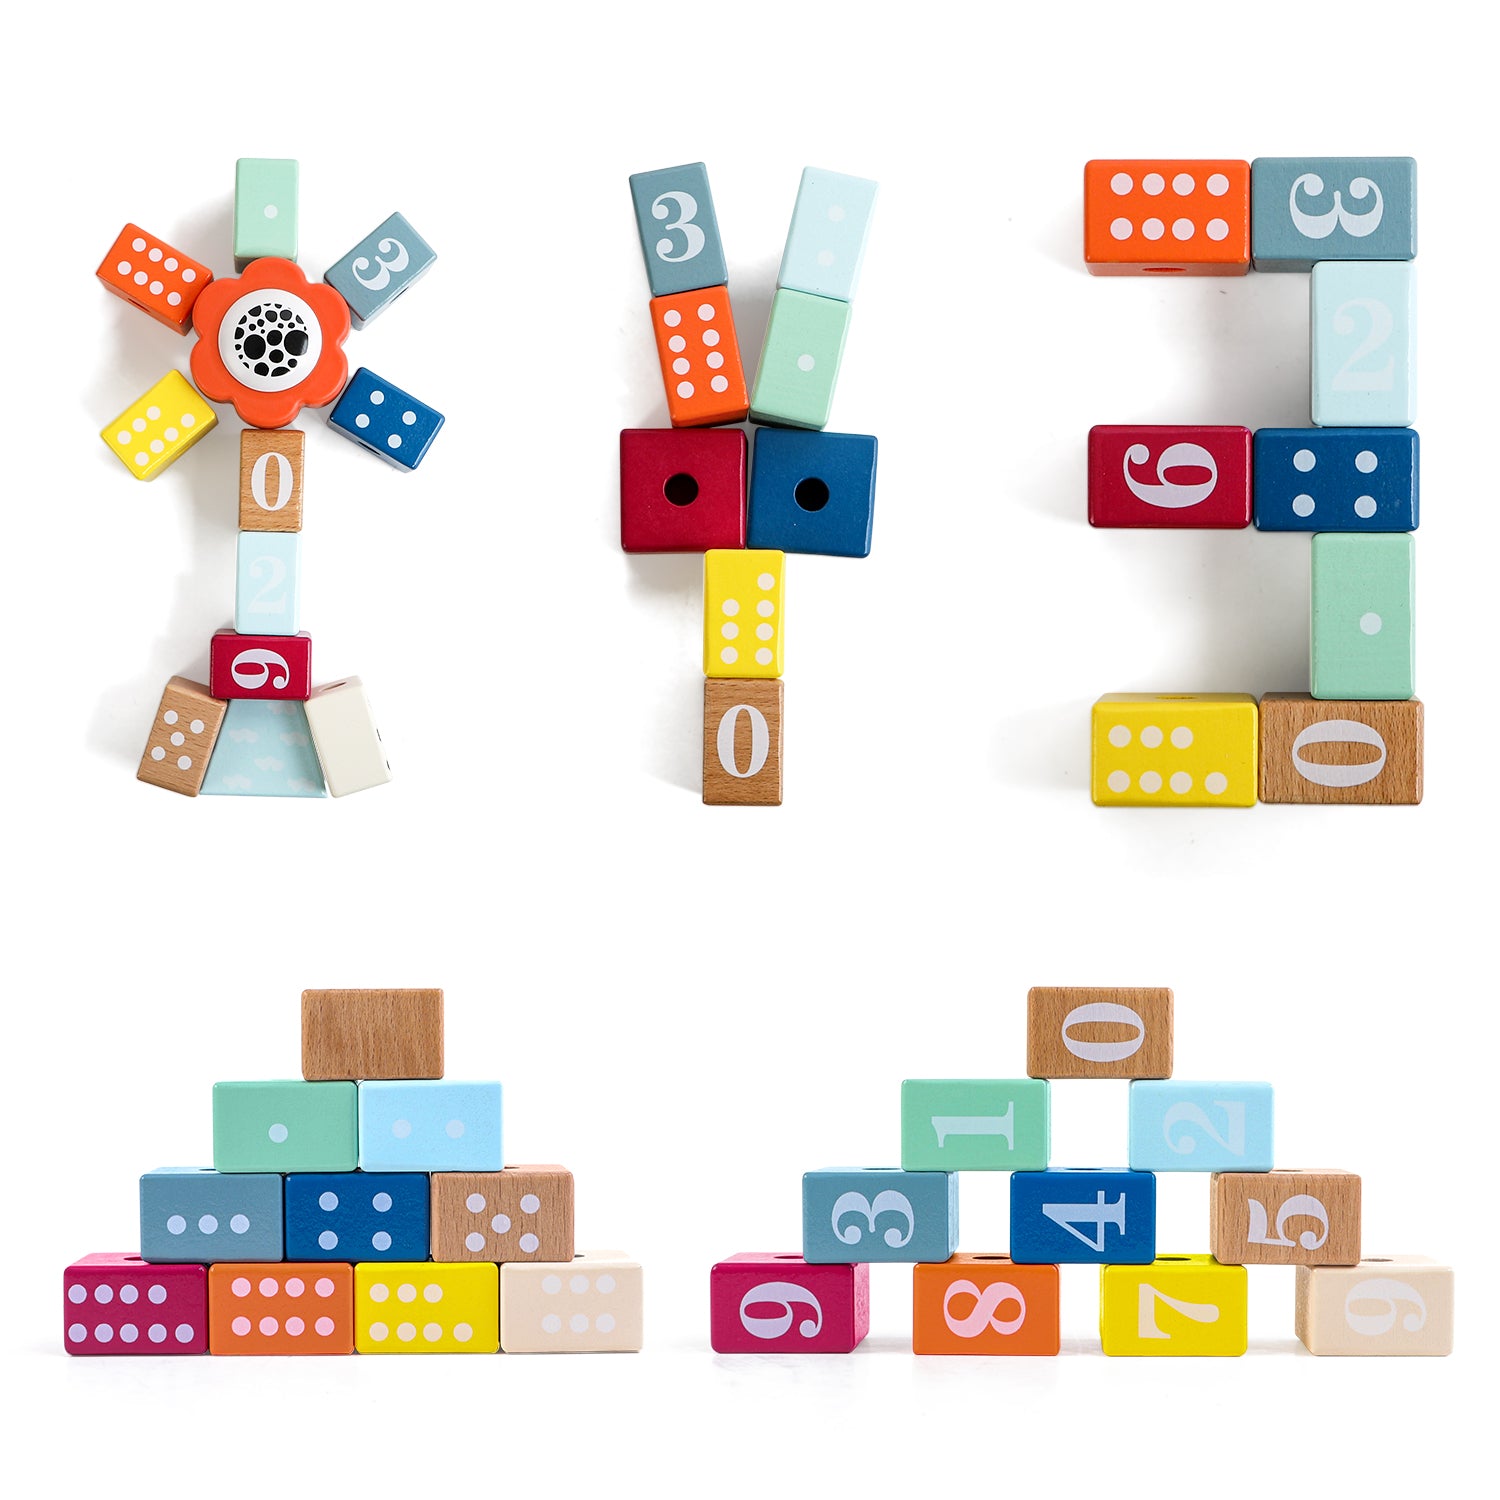 Colourful set of building blocks: A tower, a train or a house – there are no limits to children’s imagination when building with these colourful wooden blocks. Various shapes and colours are ideal for holding, building, and discovering.